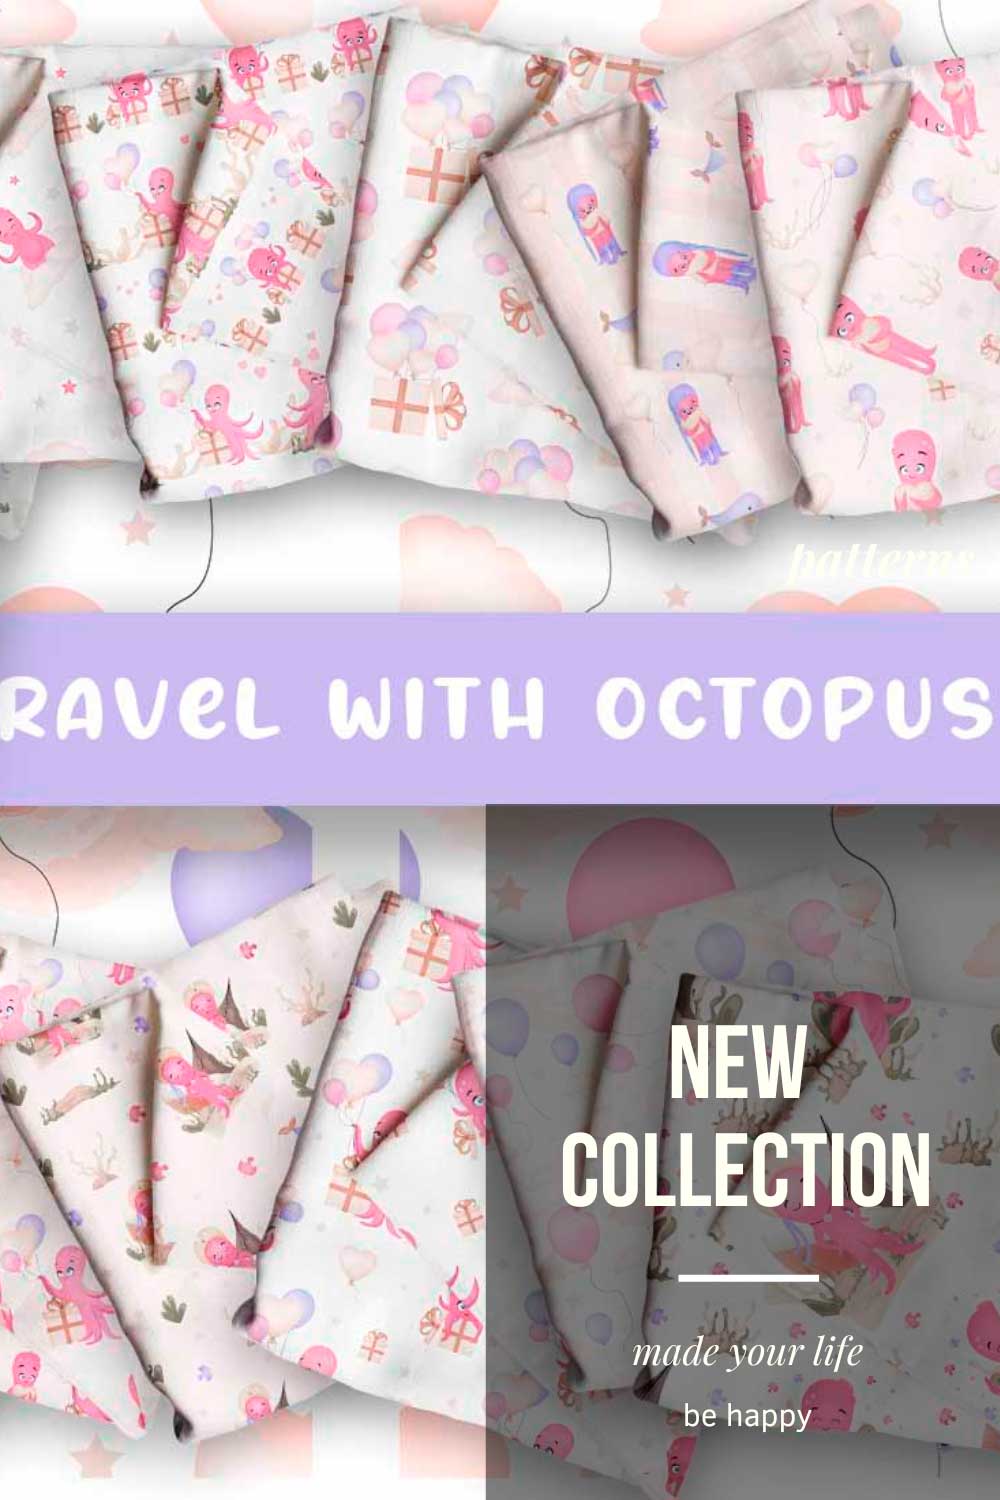 Set of images of colorful patterns with cartoon octopus.